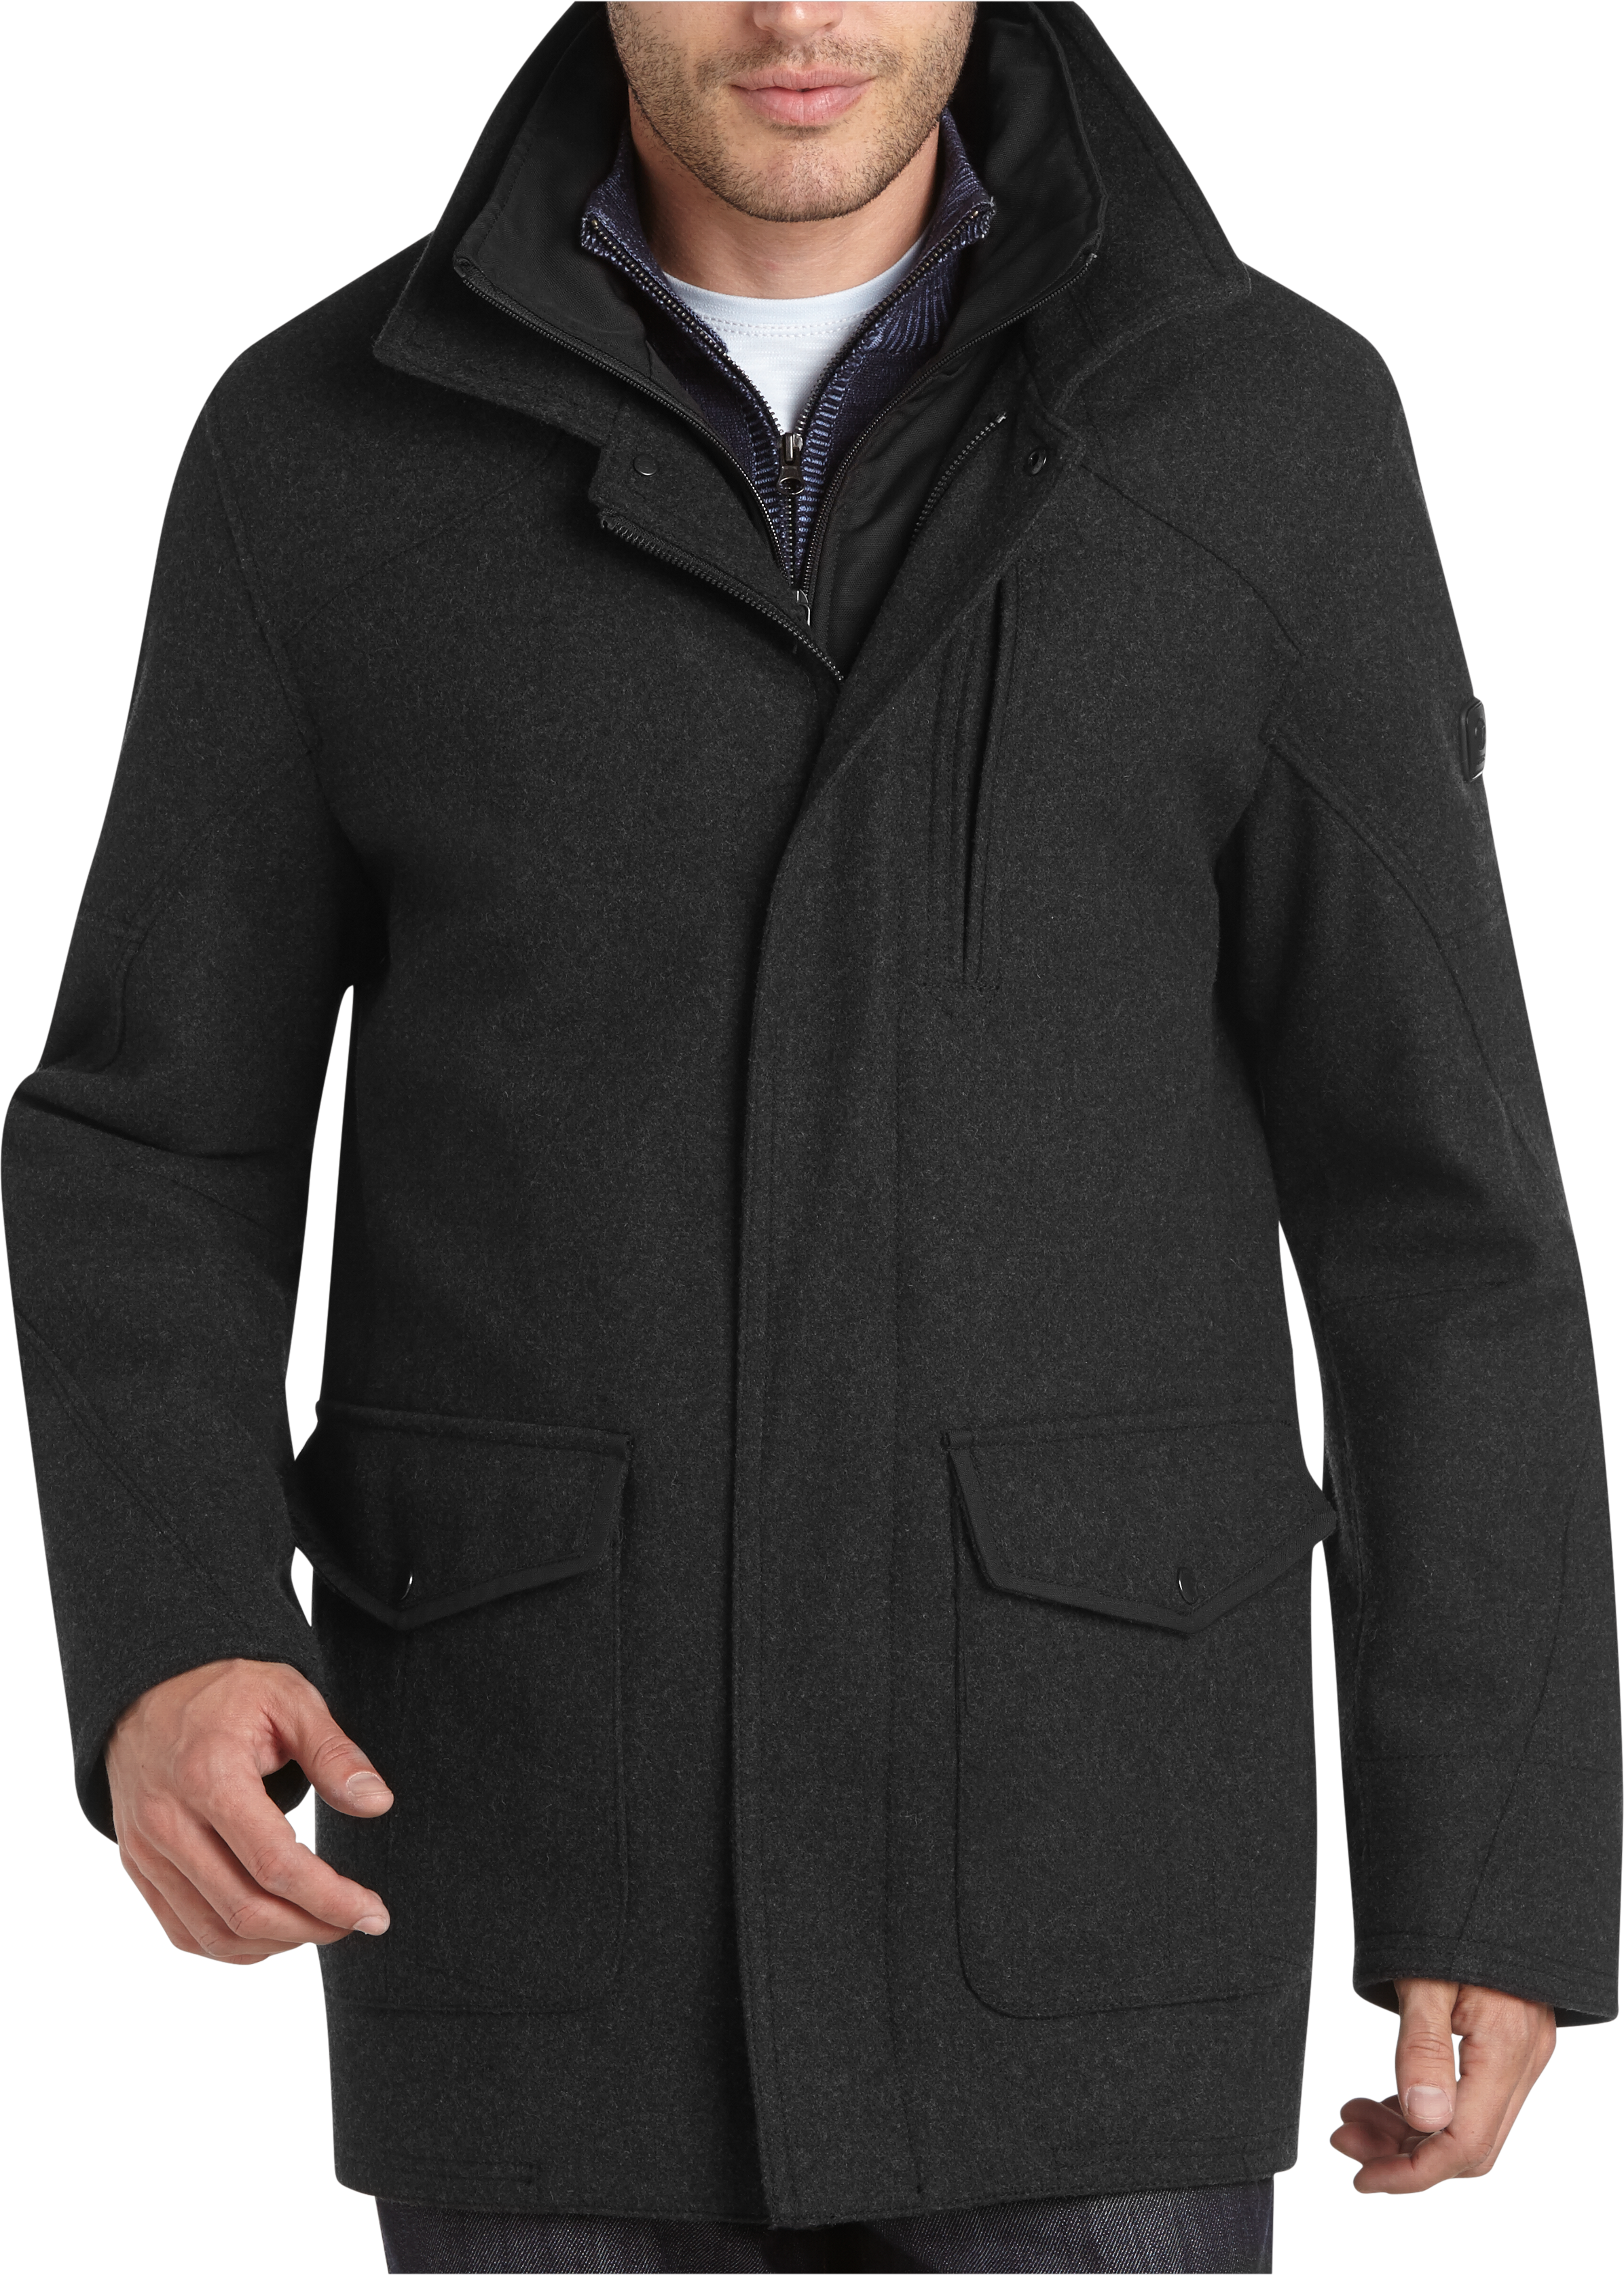 T-Tech by Tumi Charcoal Gray Wool Classic Fit Peacoat